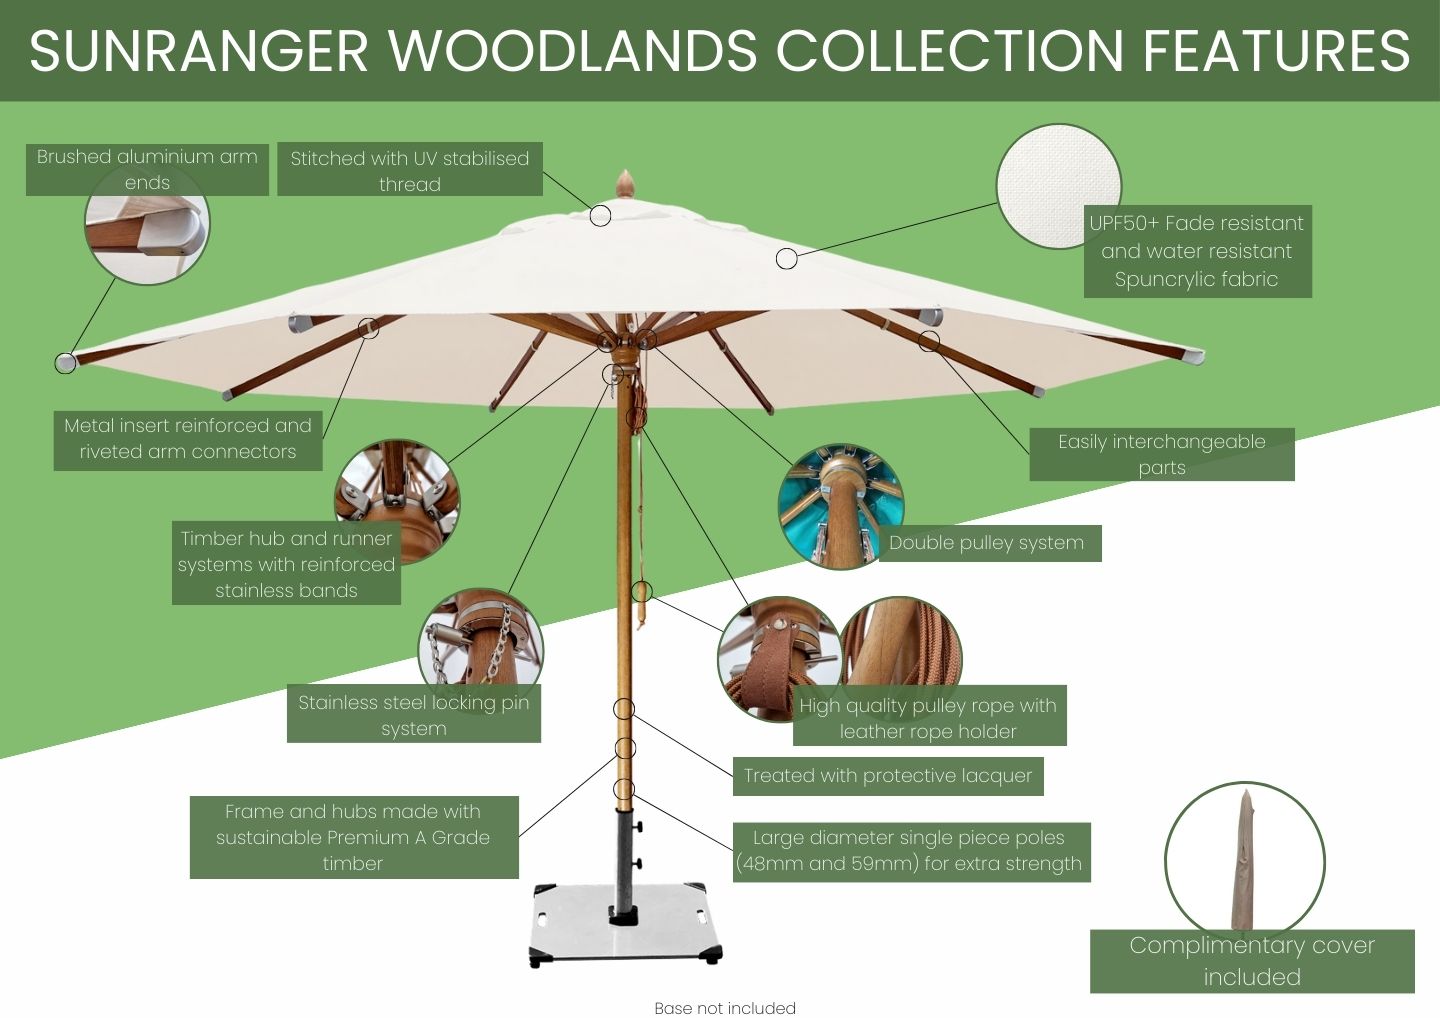 Woodlands Feature Infographic